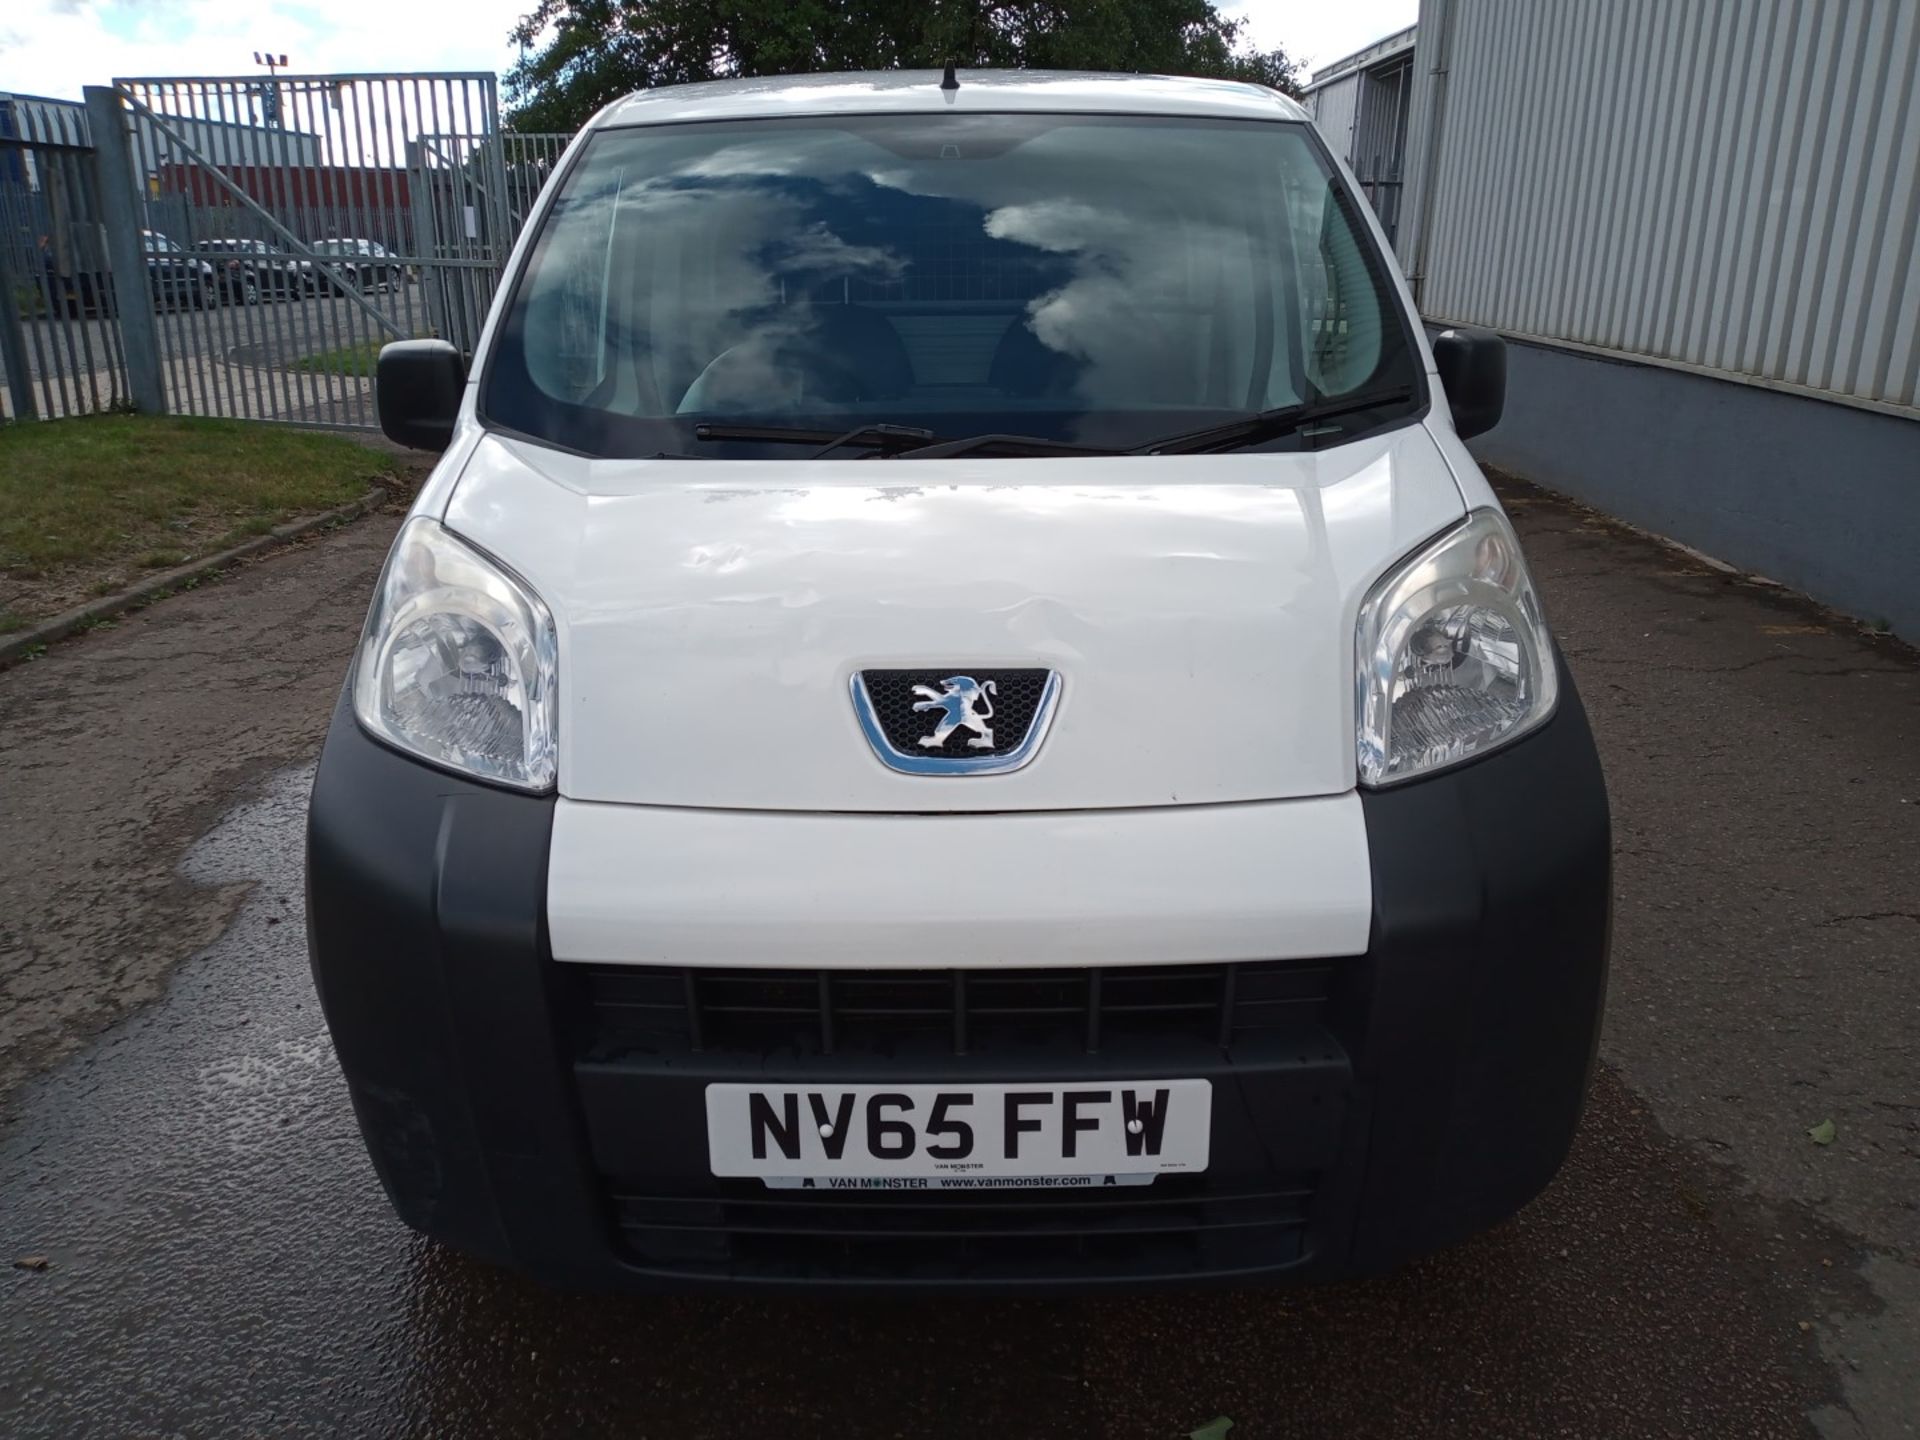 2015 Peugeot Bipper S Hdi White Panel - CL505 - Ref: VVS031 - Location: Corby, Northamptonshire - Image 3 of 25